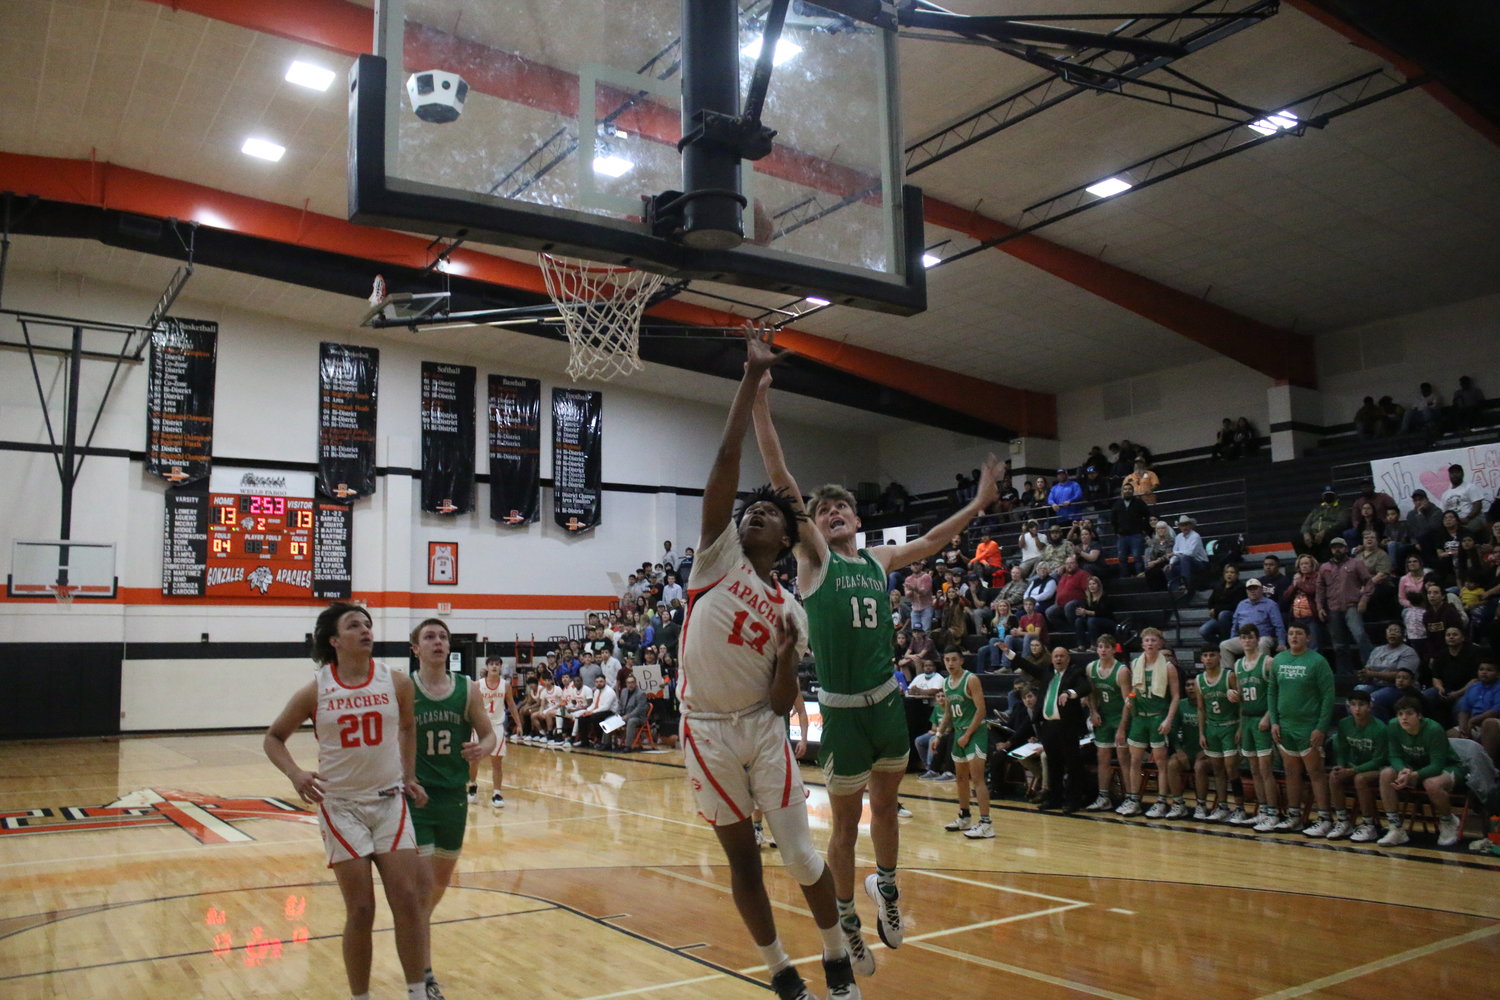 Gonzales forward Alex Escobedo follows up an offensive rebound with a putback into the hoop in the first quarter of the Apaches’ 62-44 loss to Pleasanton on Tuesday, Feb. 8. Escobedo scored 16 points and was an offensive bright spot for Gonzales.